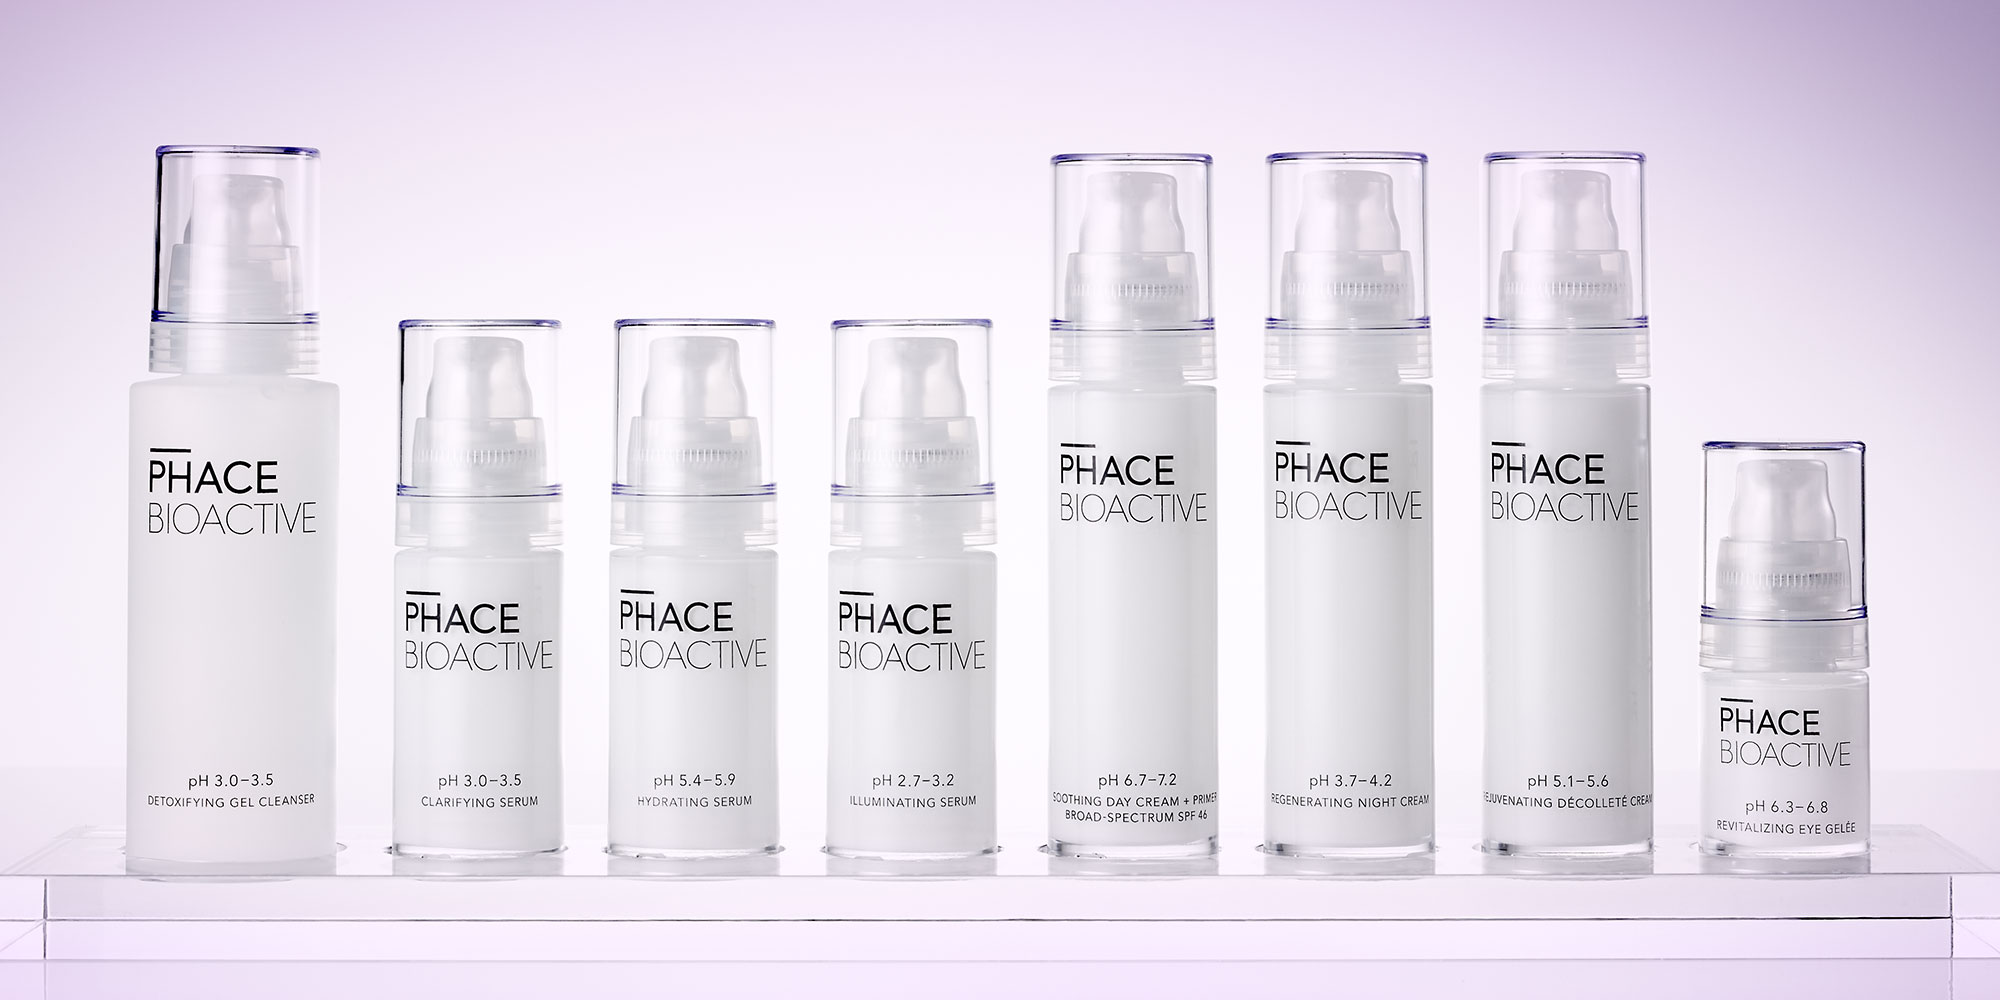 Phace Bioactive Primary Packaging Lineup